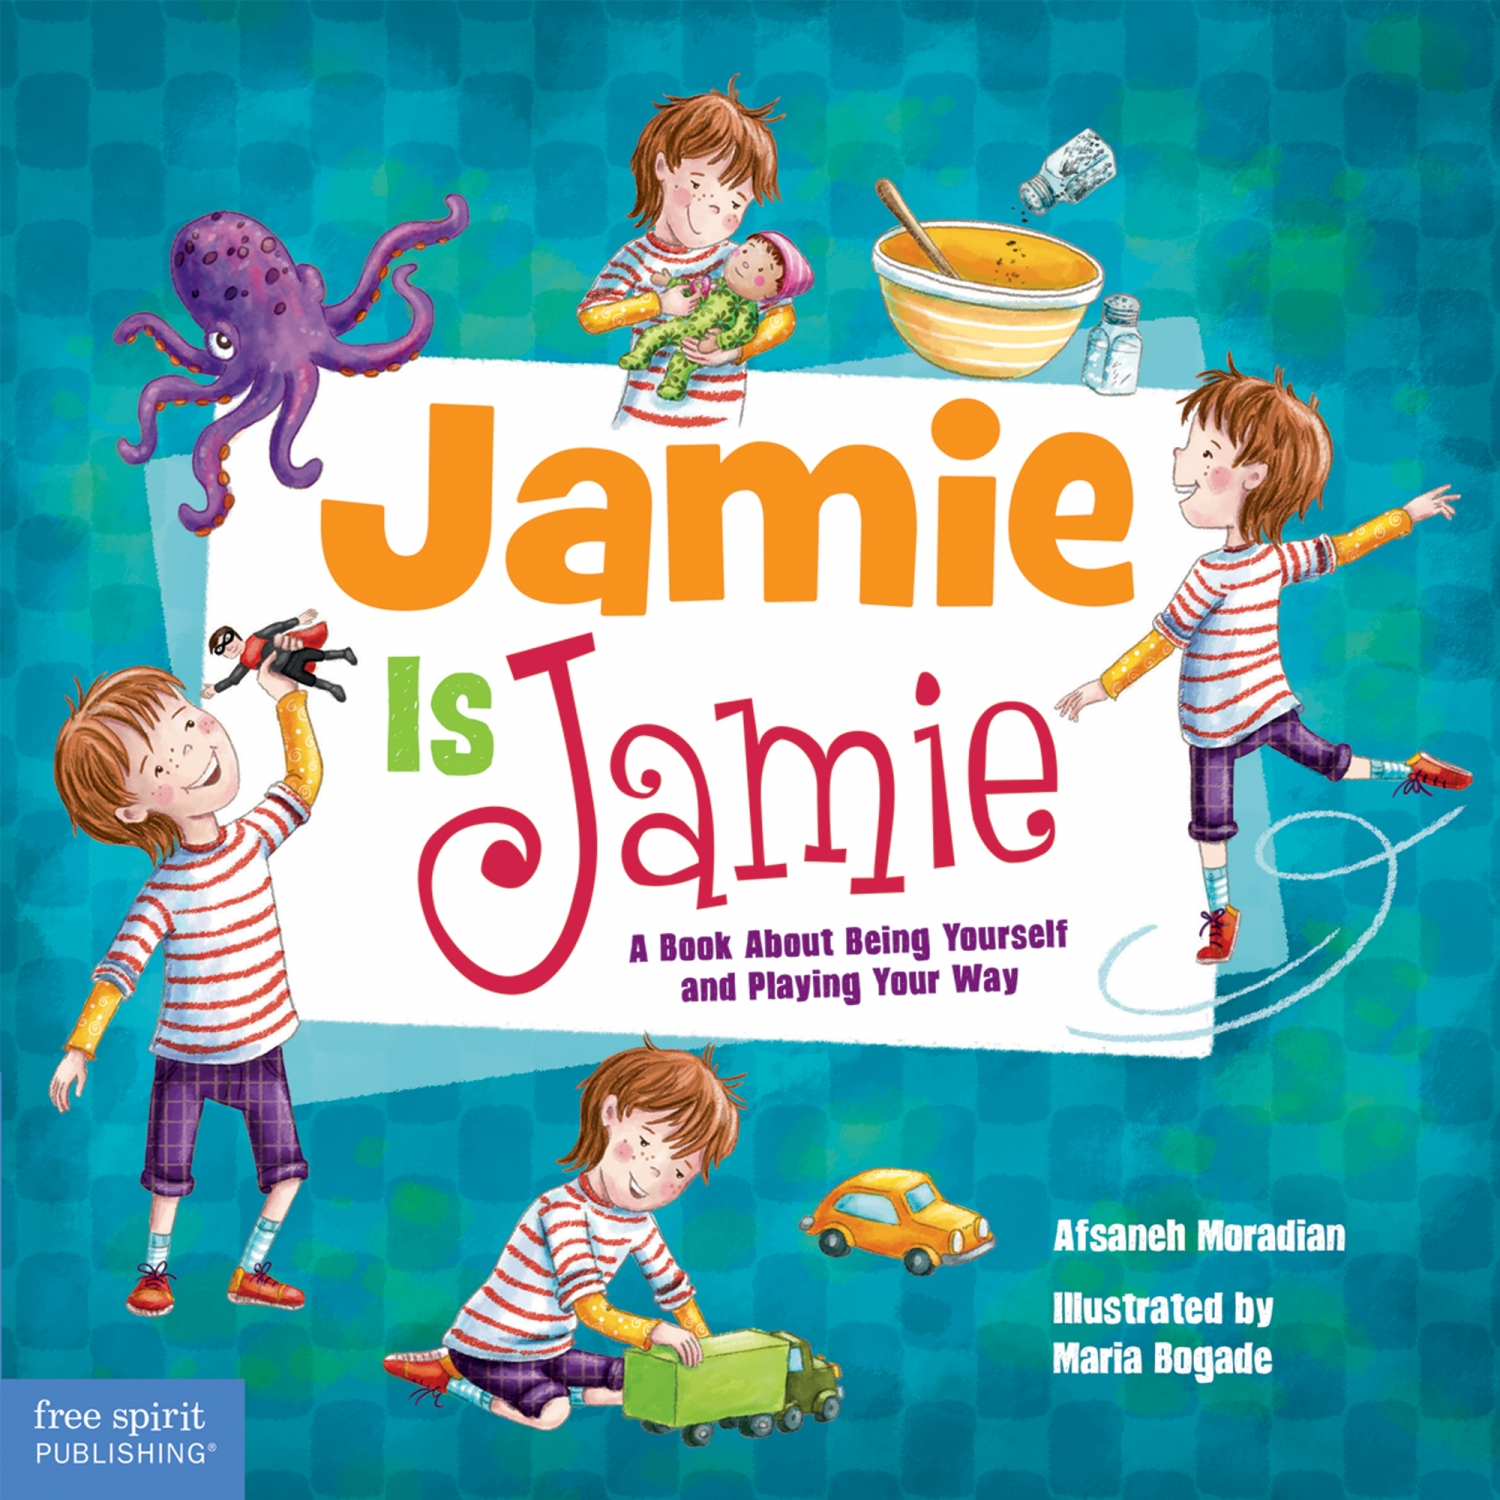 jamie oliver children's book review